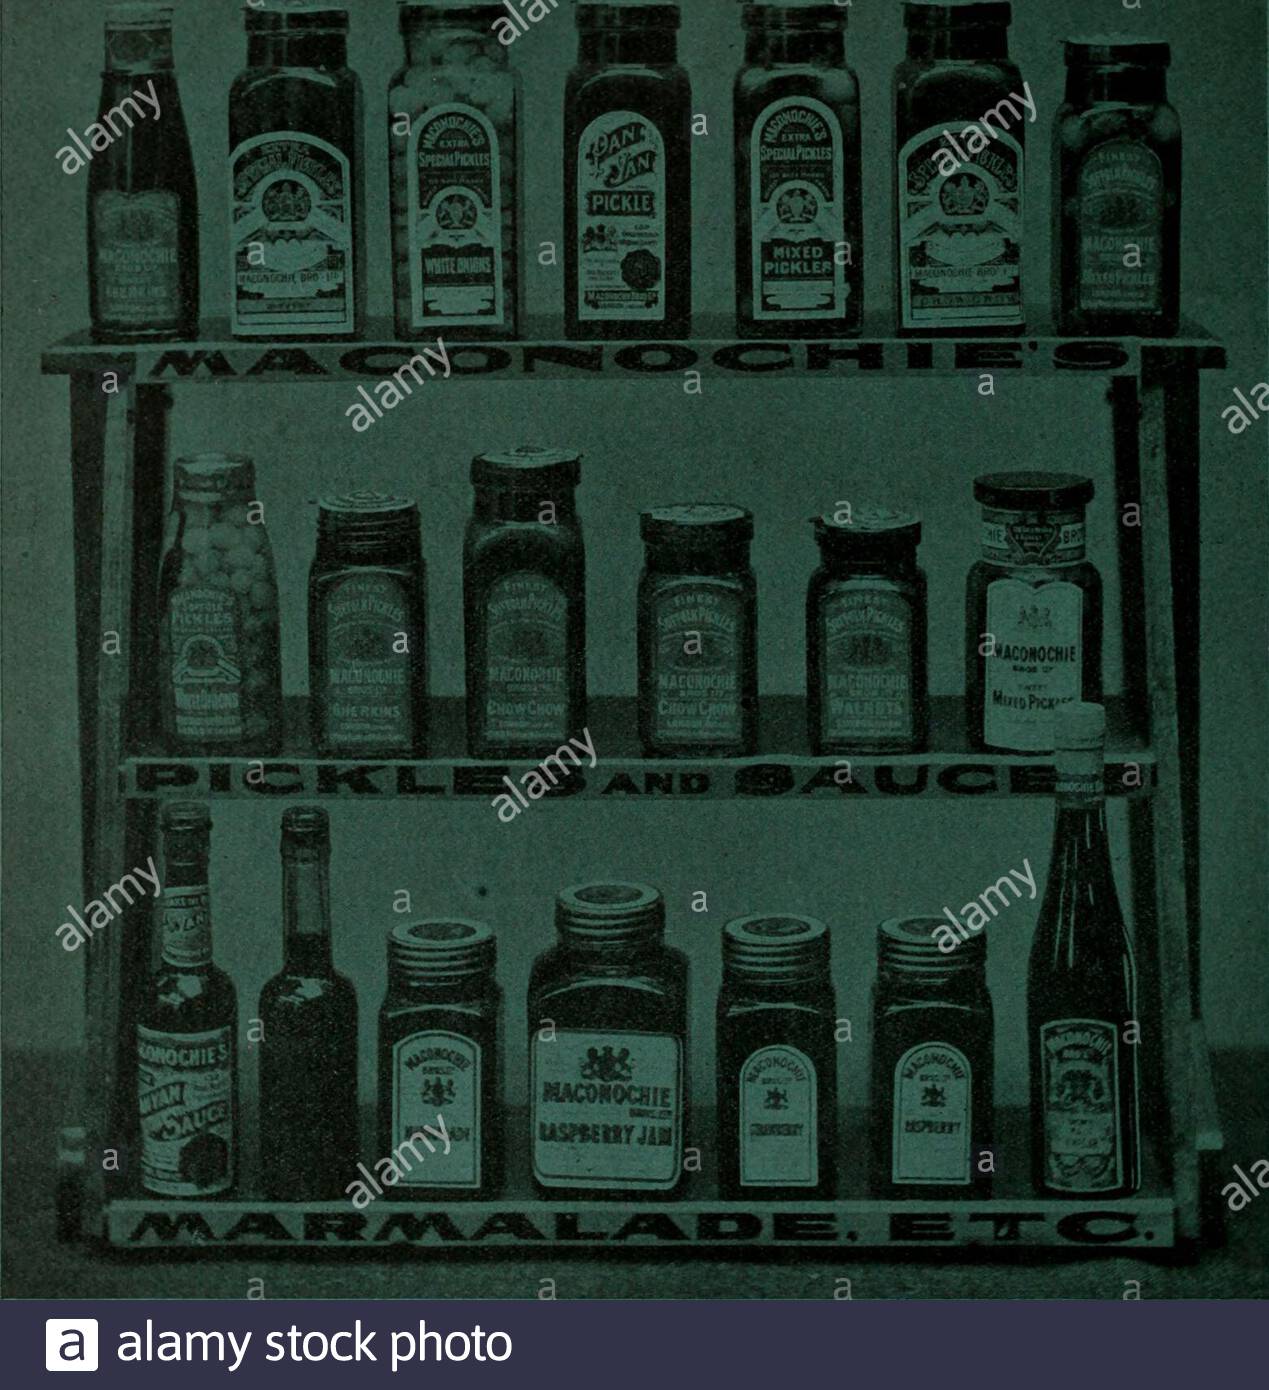 canadian grocer july december 1908 ovisioncanned goods and foodstuffs trades of canada montreal 232 mcgill st 10 front st east winnipeg 511 union bank building london eng 88 fleet 8f eg vol xxii publication office december 18 1908 vo st m oxford 1r blue v 1 leaves no room for criticism keens oxford blue is so pure in its constituentsthat it does its work perfectlythat is all your customers want for sale by all jobbers frank magor co jr montreal agents for the dominion of canada it is positively the most nourishing and healthfultable food 2AJ4PAY